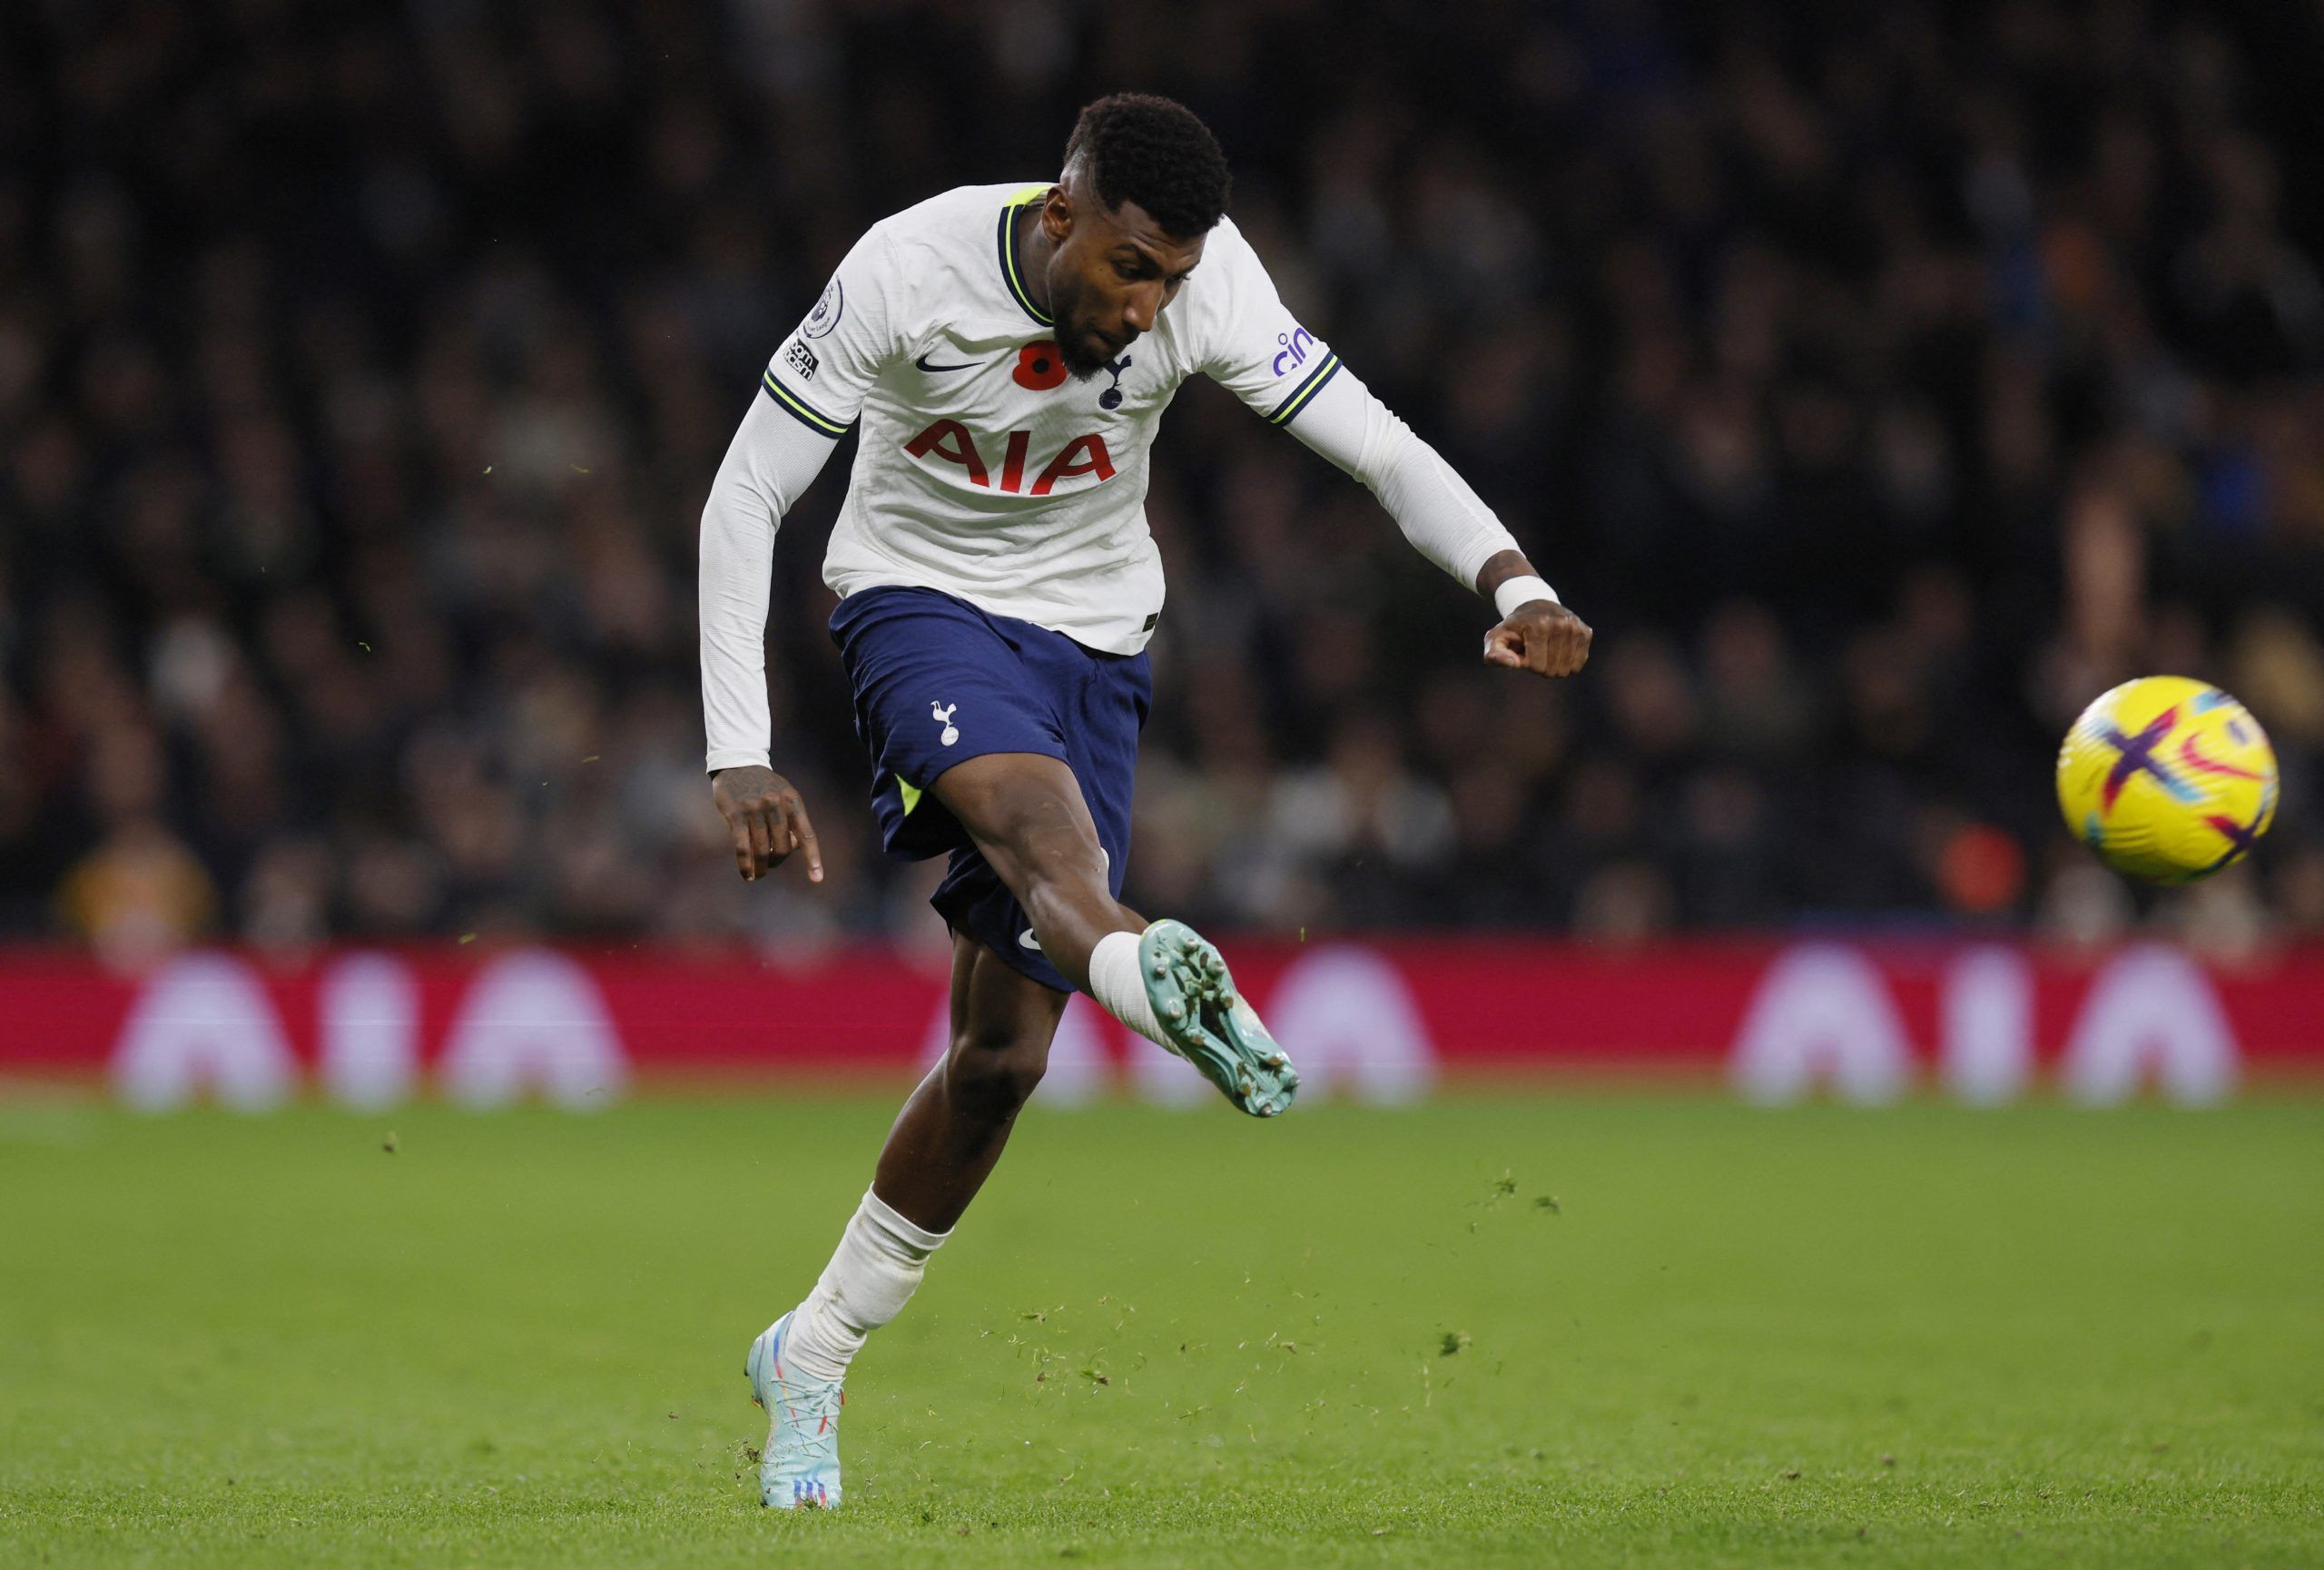 Tottenham Hotspur's Emerson Royal in action vs Liverpool in the Premier League